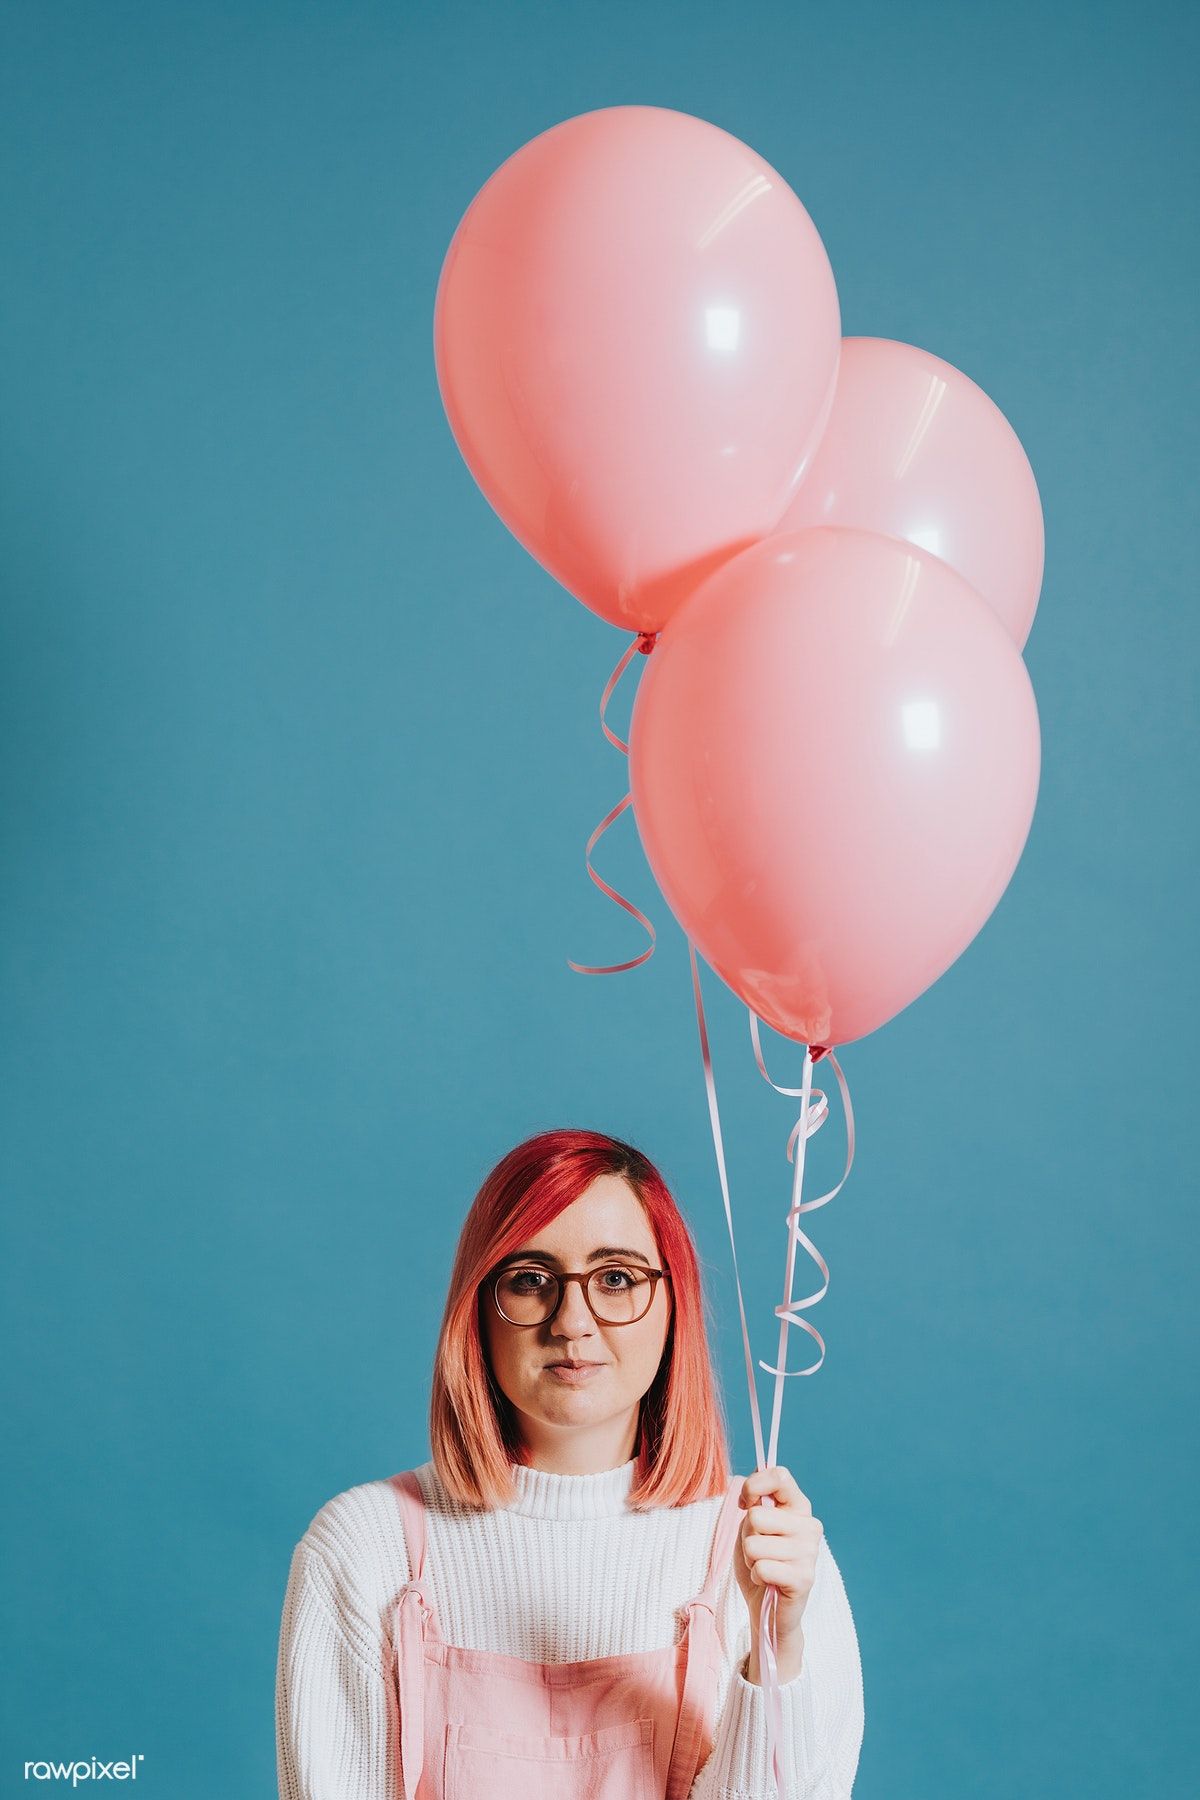 Download premium image of Woman holding a pastel pink balloon 559859. Pink balloons, Female image, Balloons photography